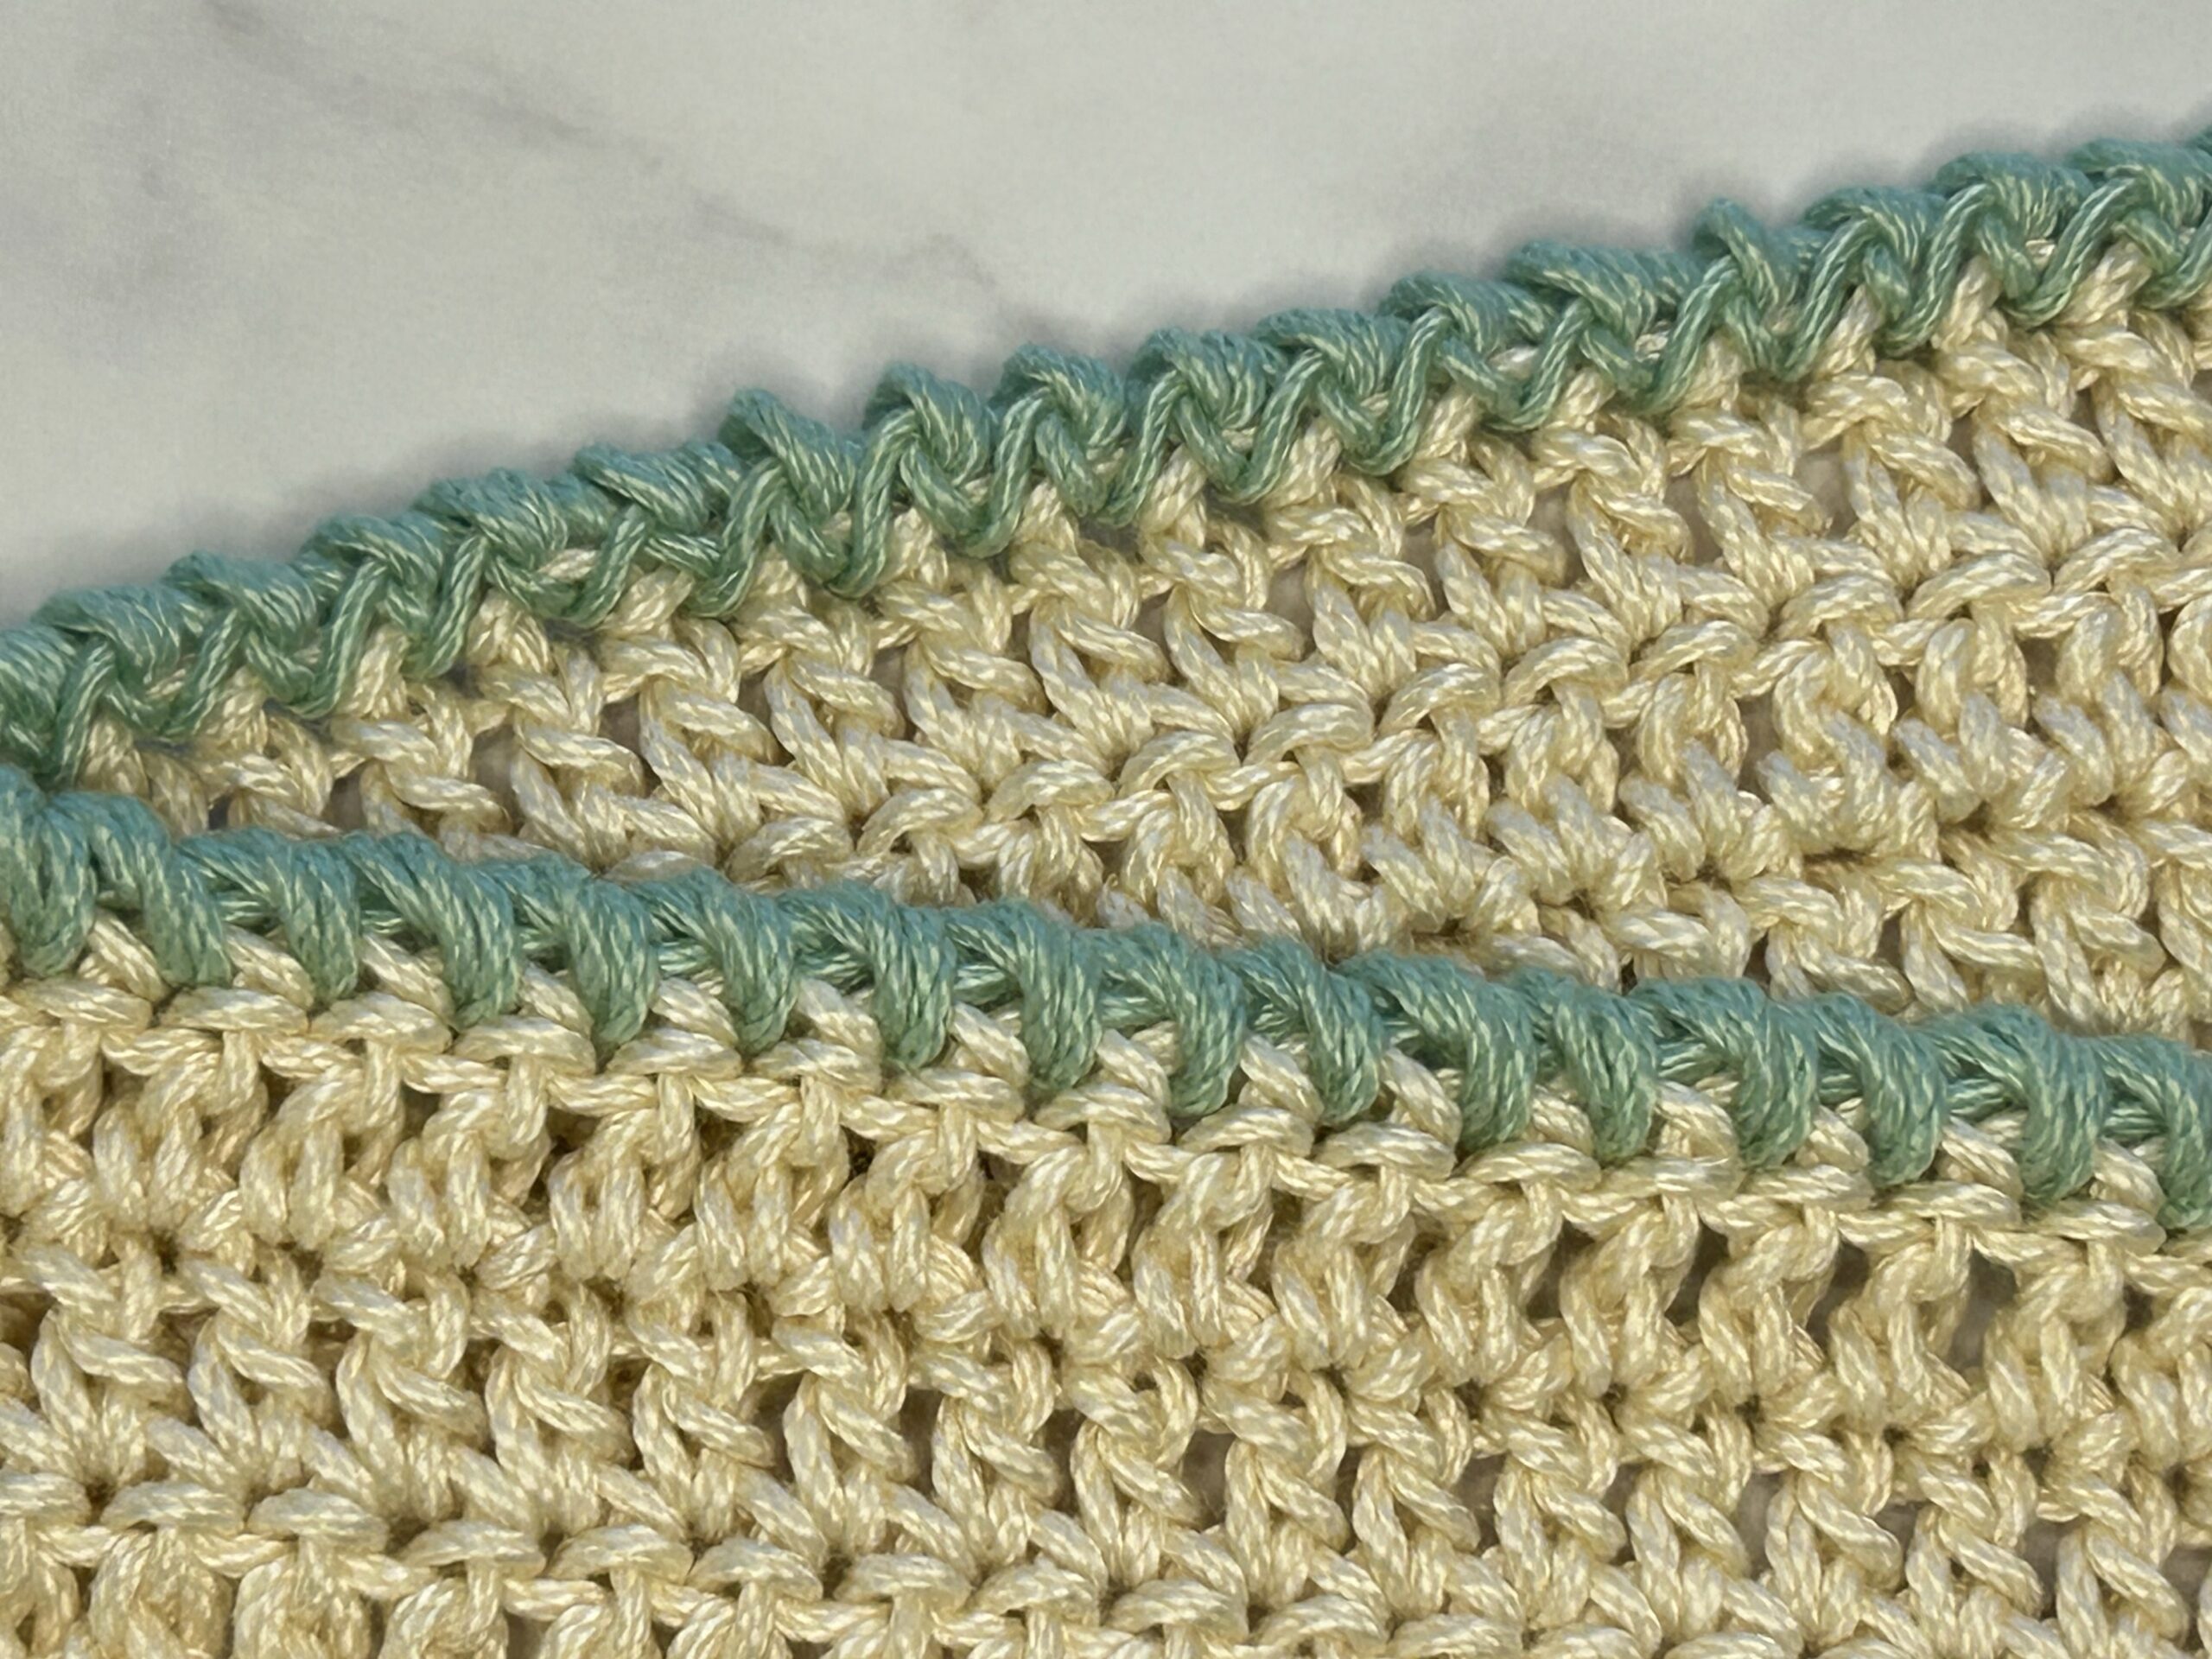 An off-white crochet piece with a green forward crab stitch border